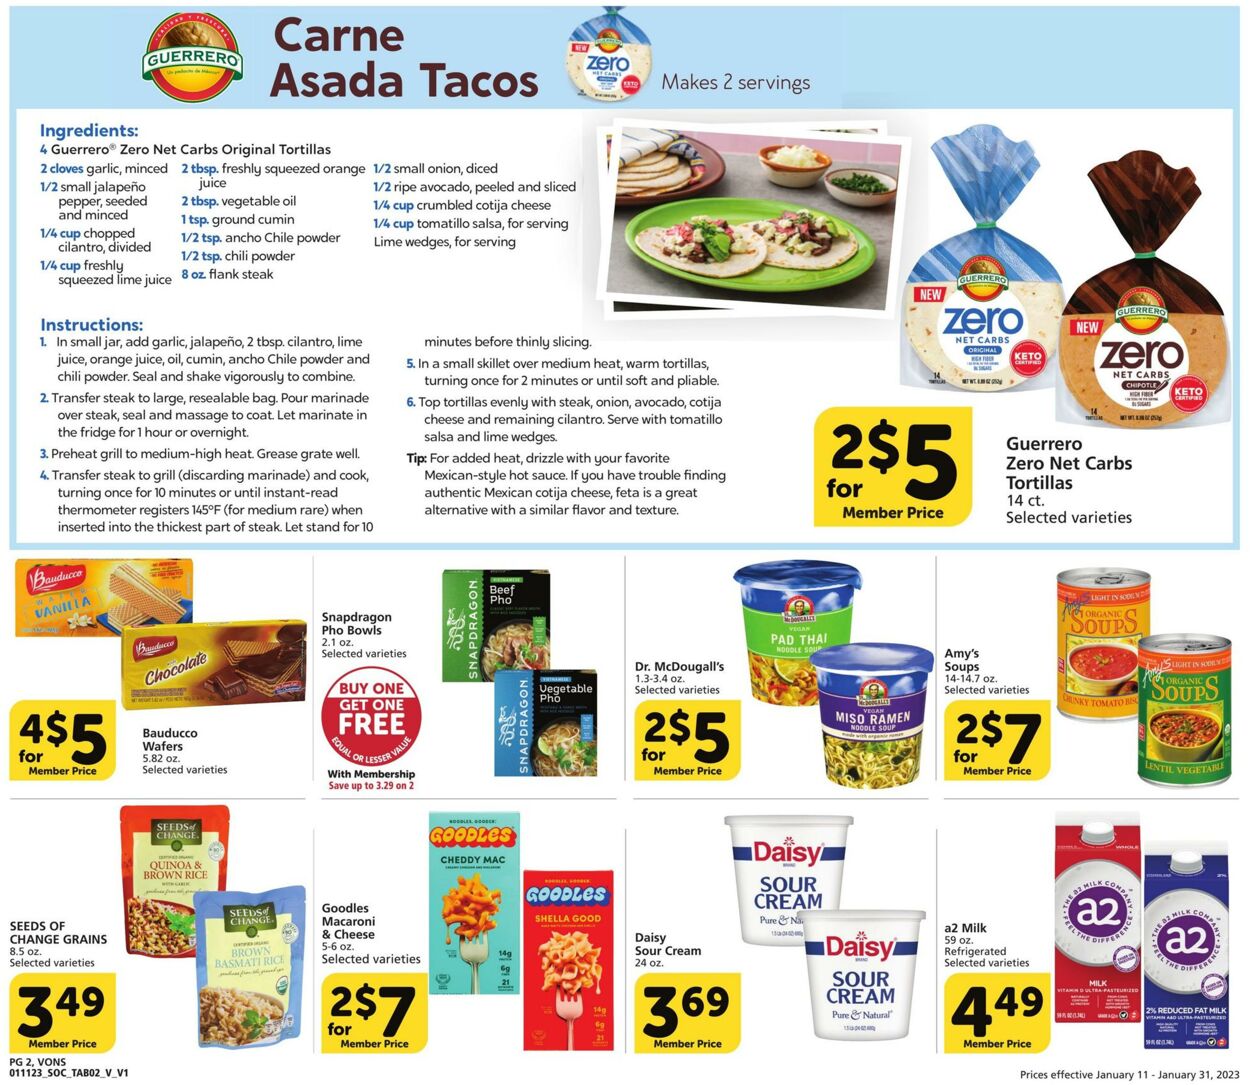 Weekly ad Vons 01/11/2023 - 01/31/2023